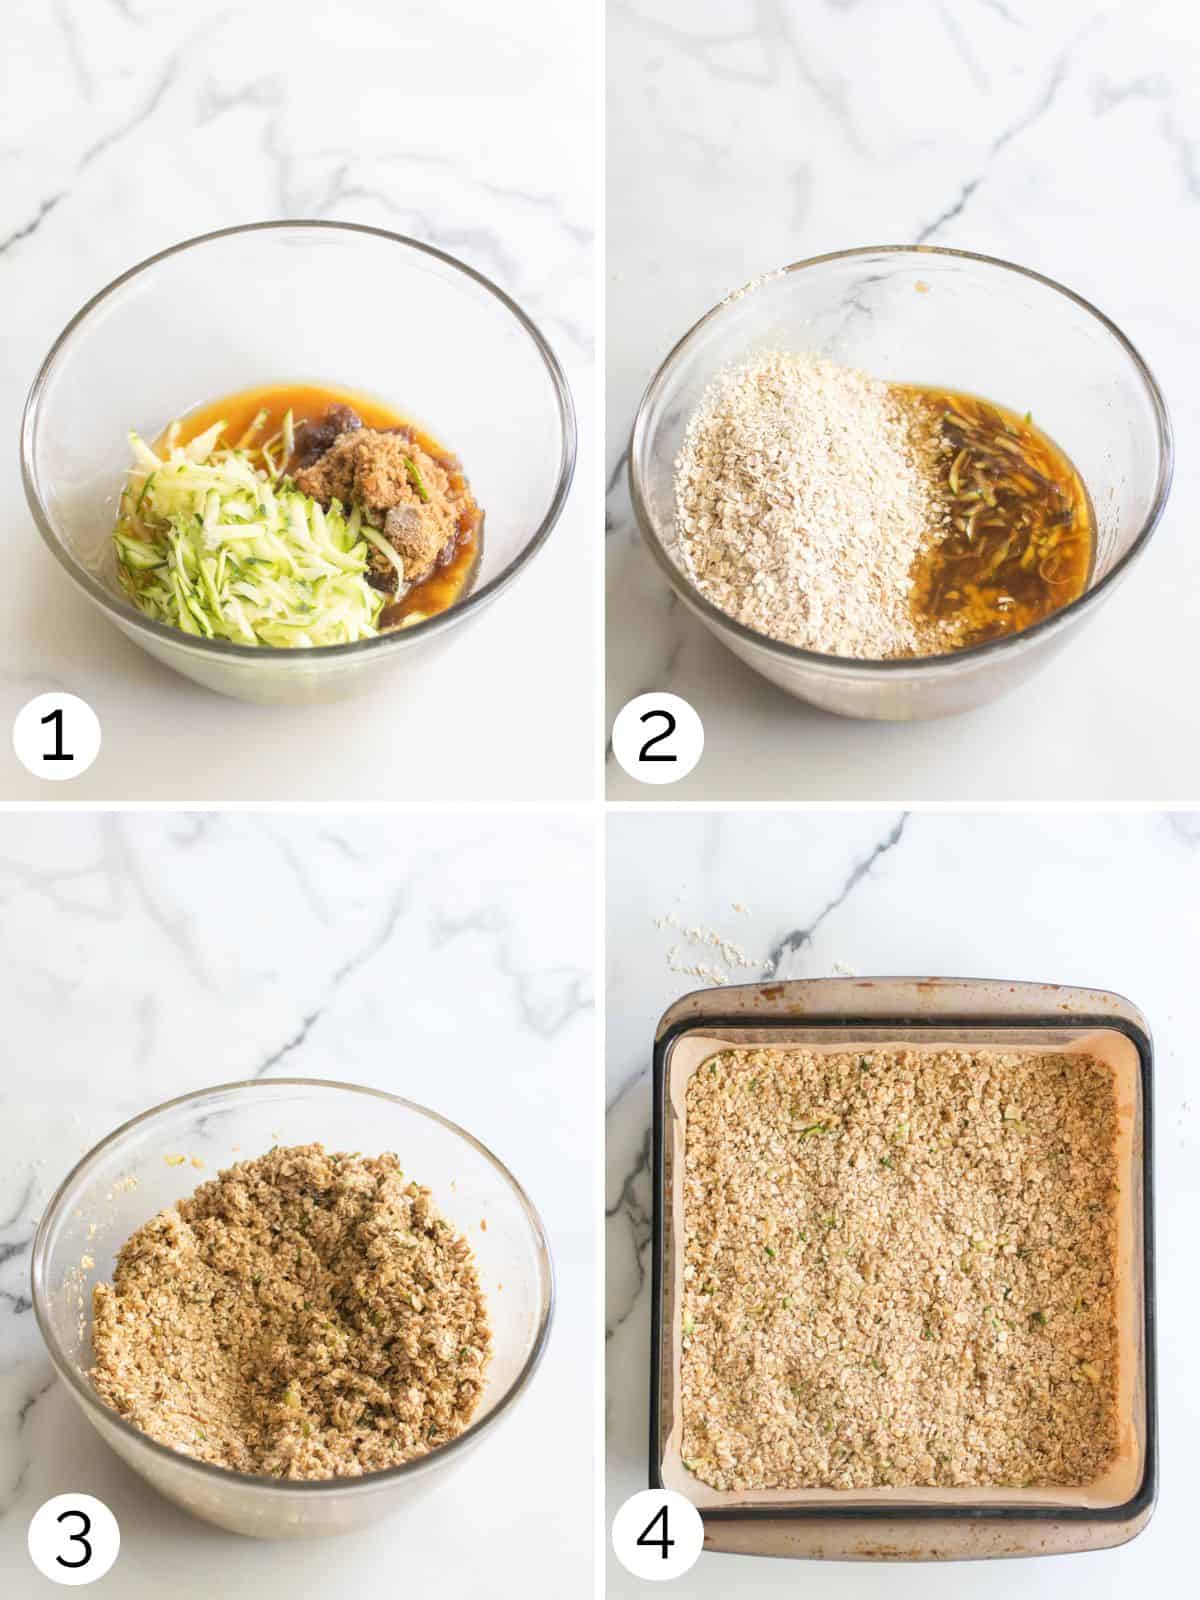 Process shots of how to combine zucchini and sugar, mix, and press into bars.